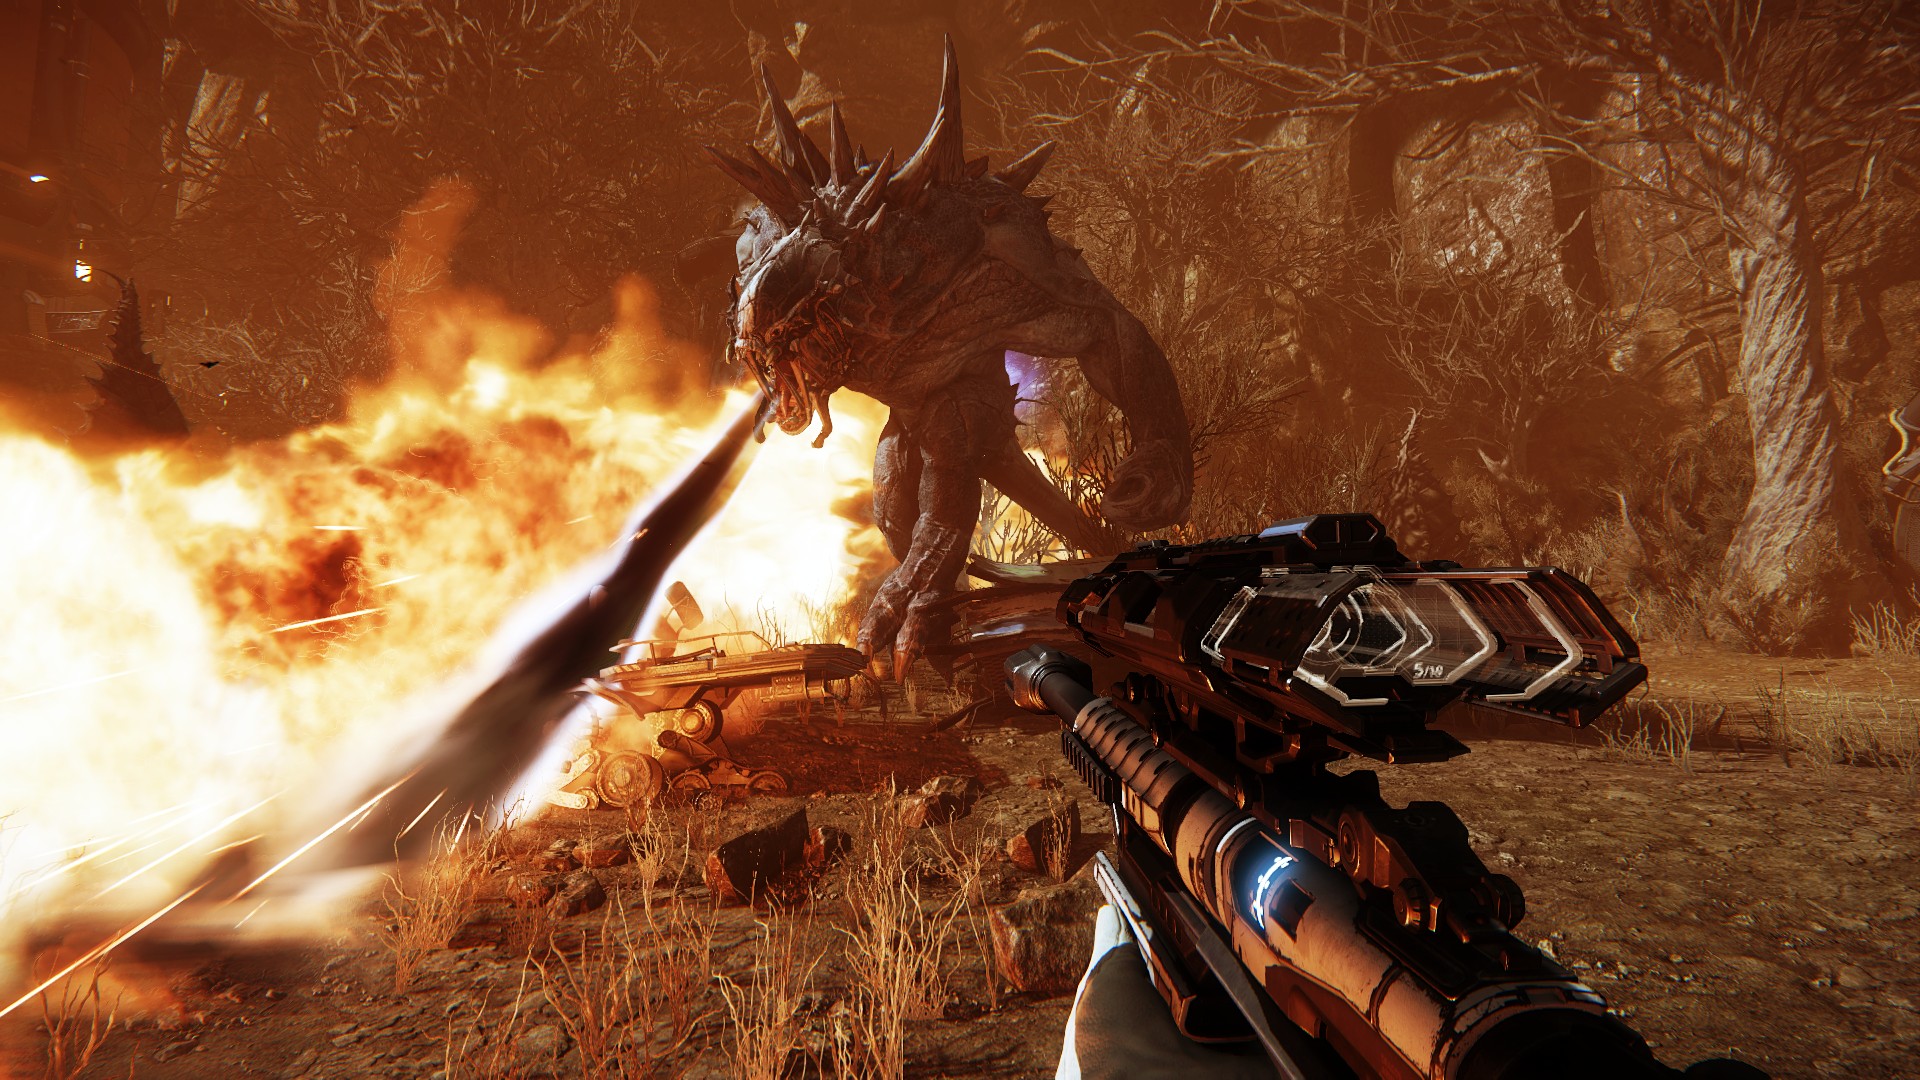 Xbox, PS4, and PC game Evolve promises